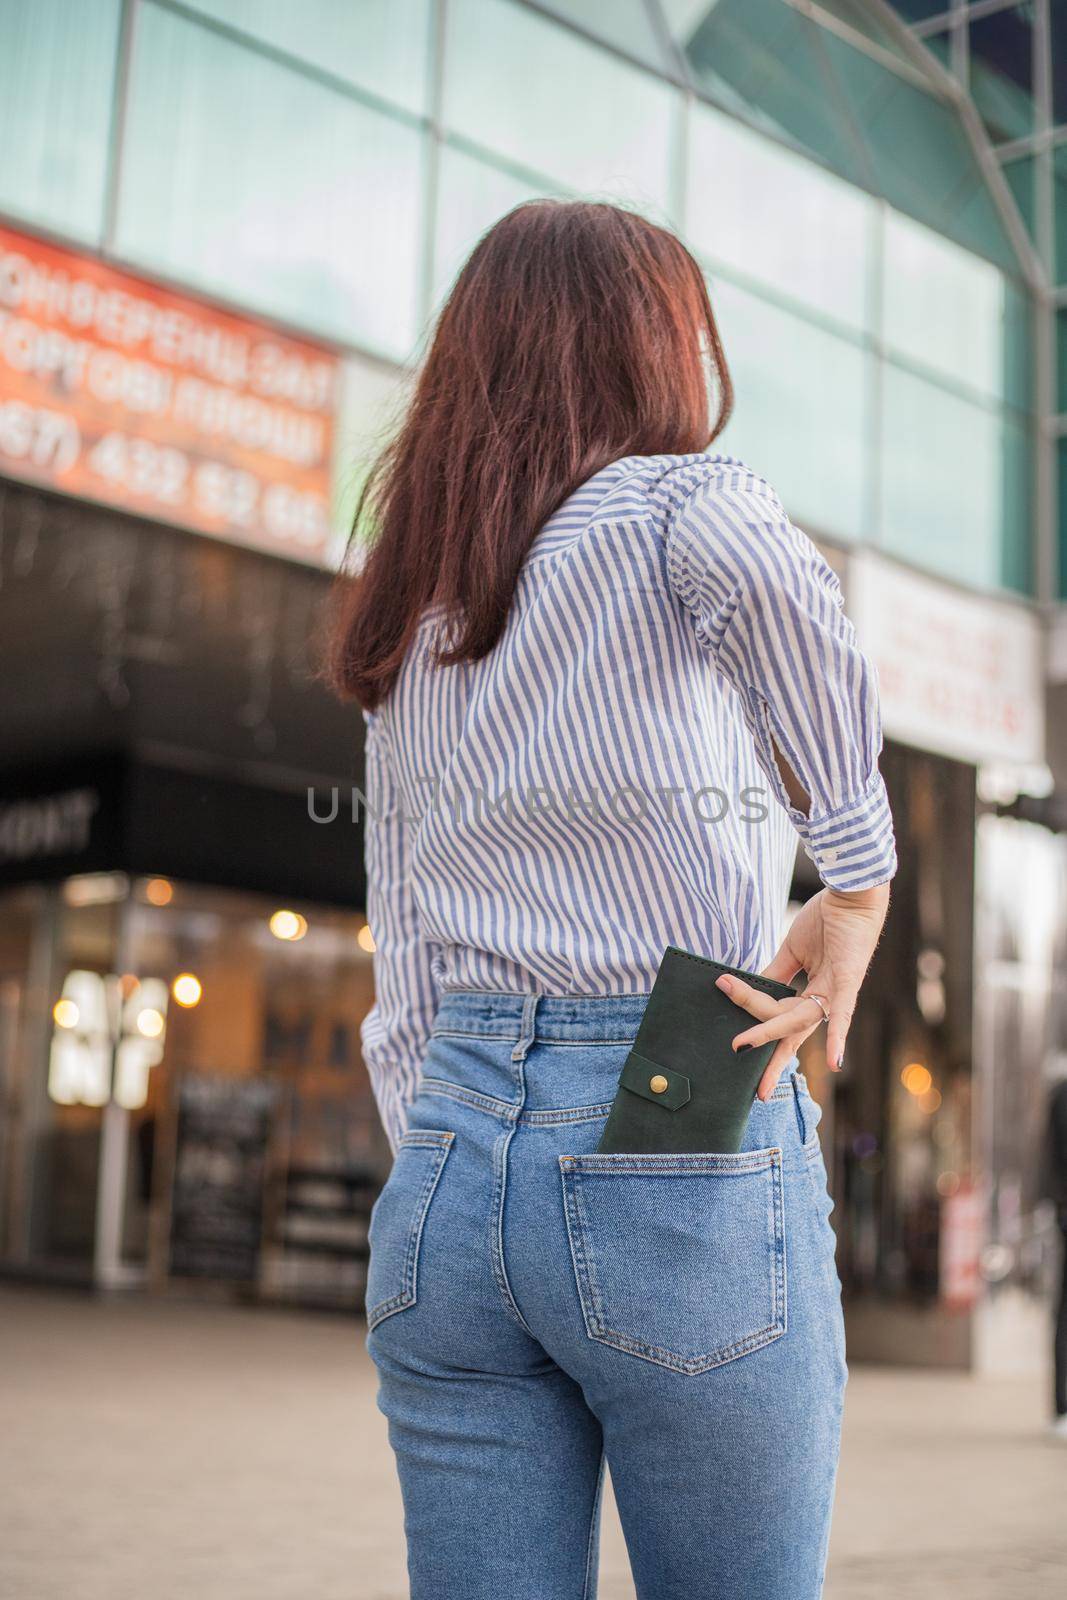 Confident woman posing in save keeping your wallet in the back pocket in pants